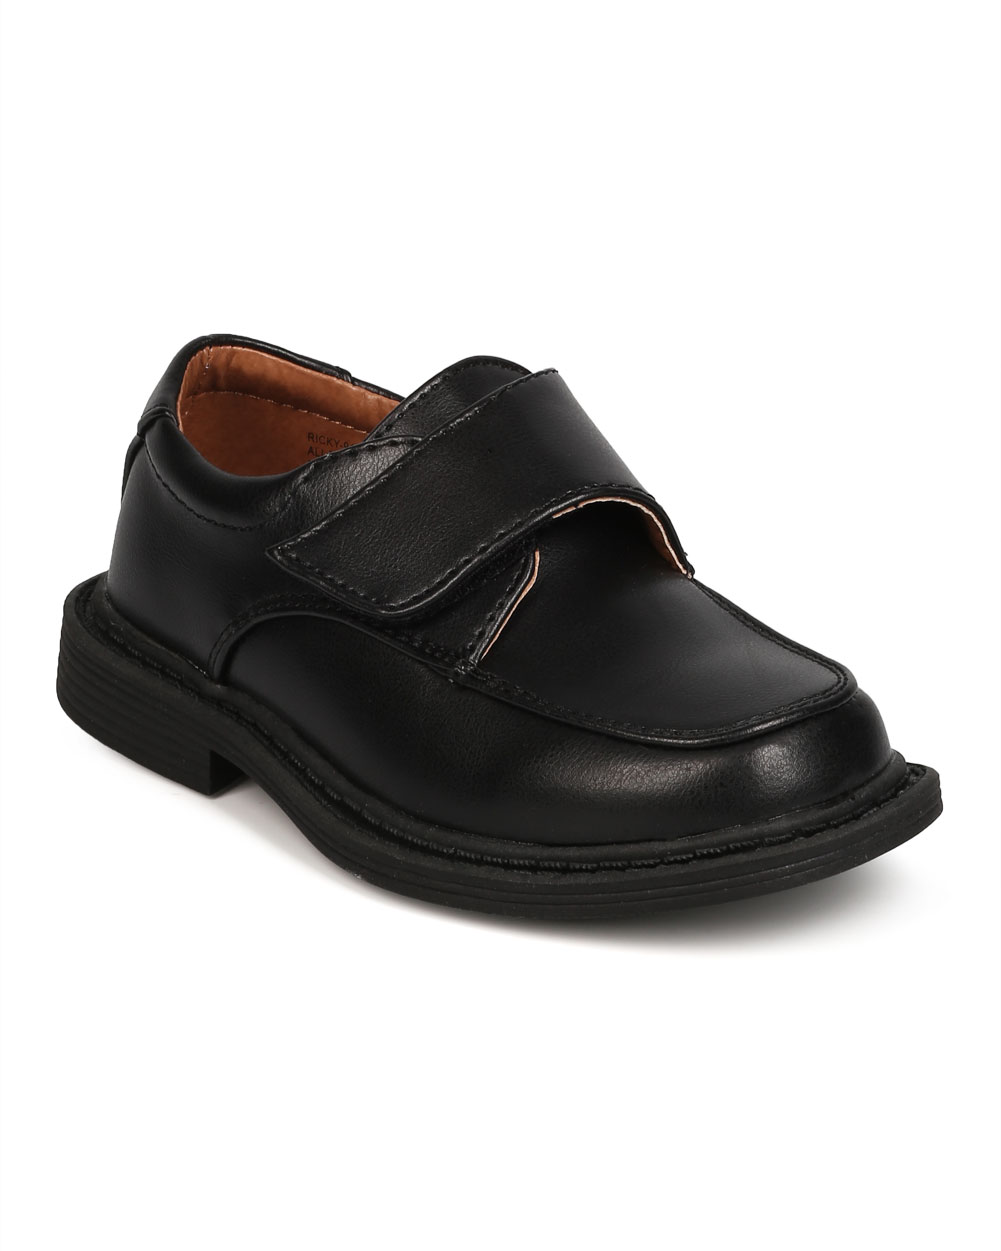 New Boy School Rider Ricky-913F Leatherette Square Toe Banded Dress Shoe - image 1 of 5